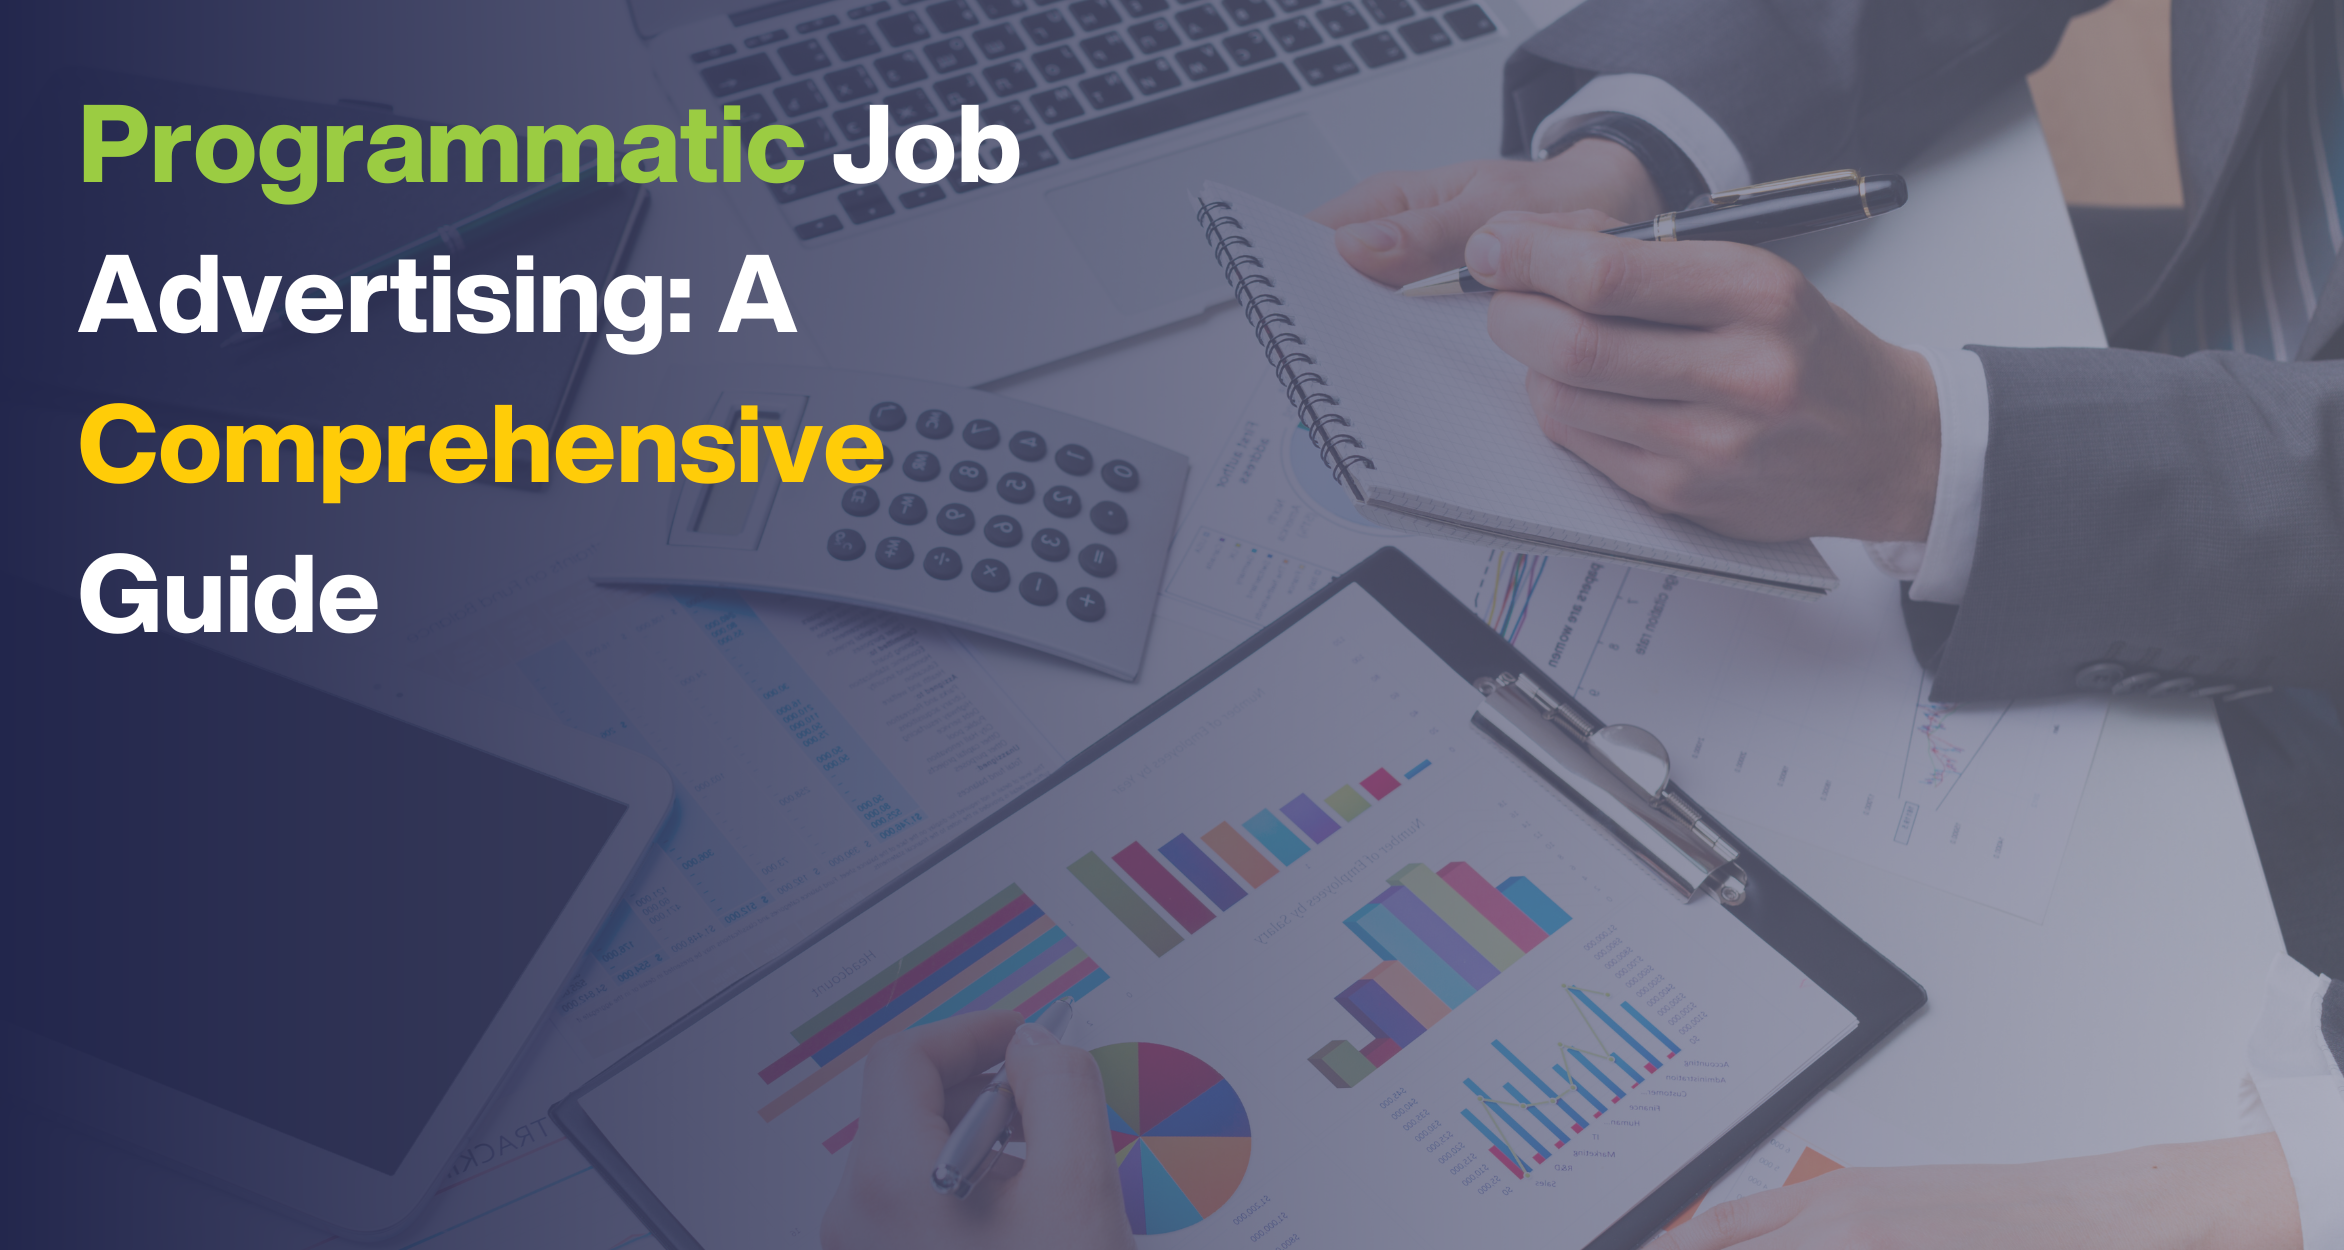 Programmatic job advertising platforms connecting employers with top-tier talent.